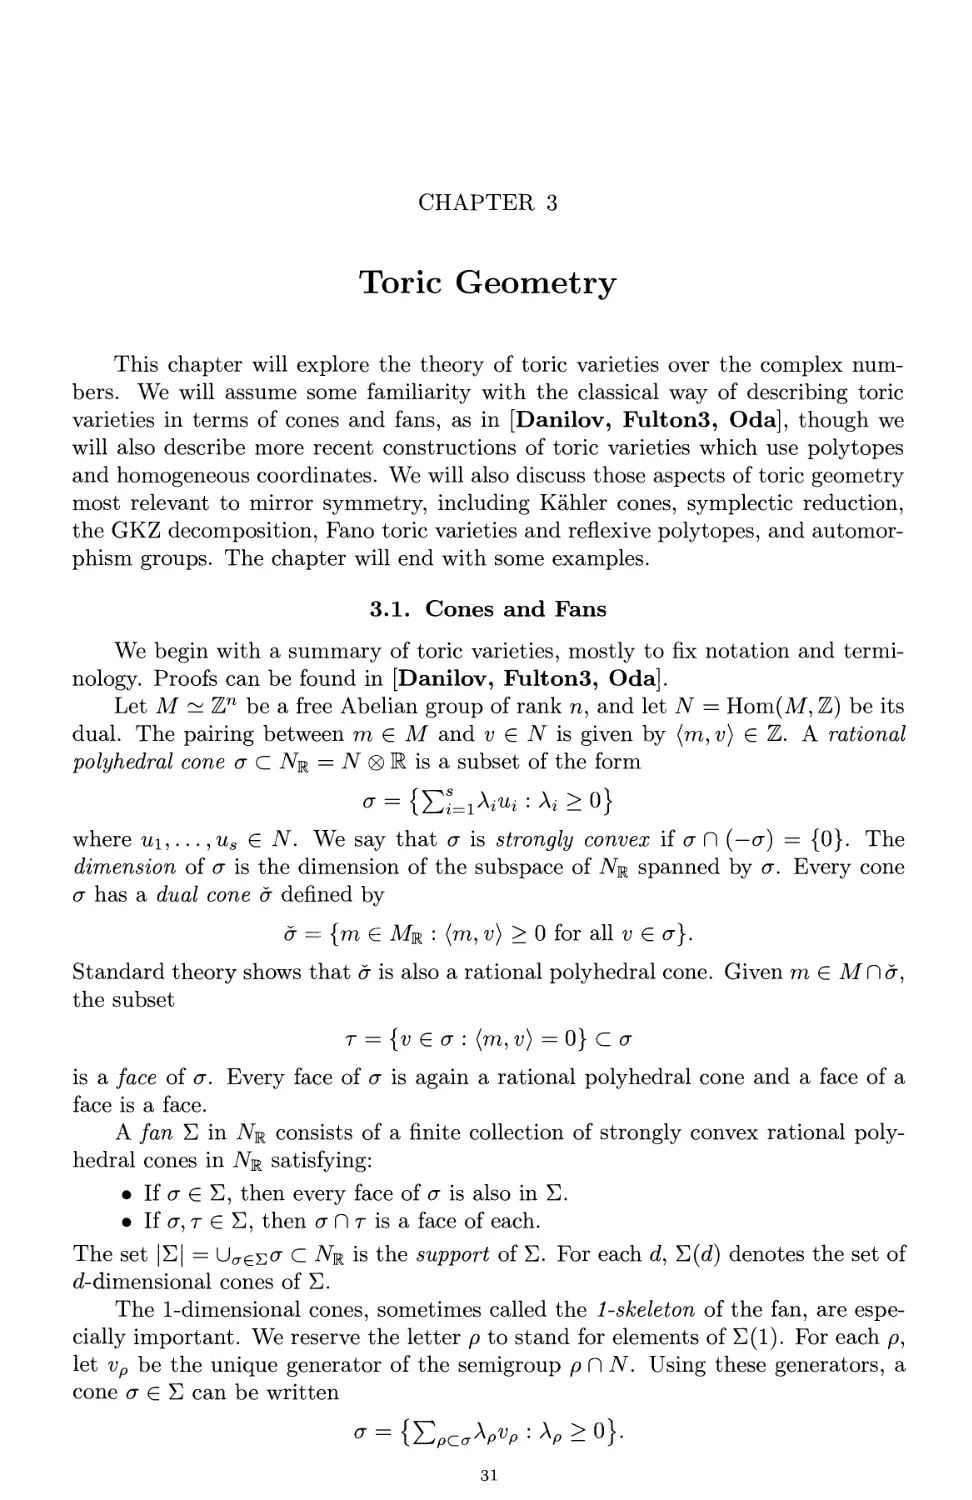 Chapter 3. Toric Geometry